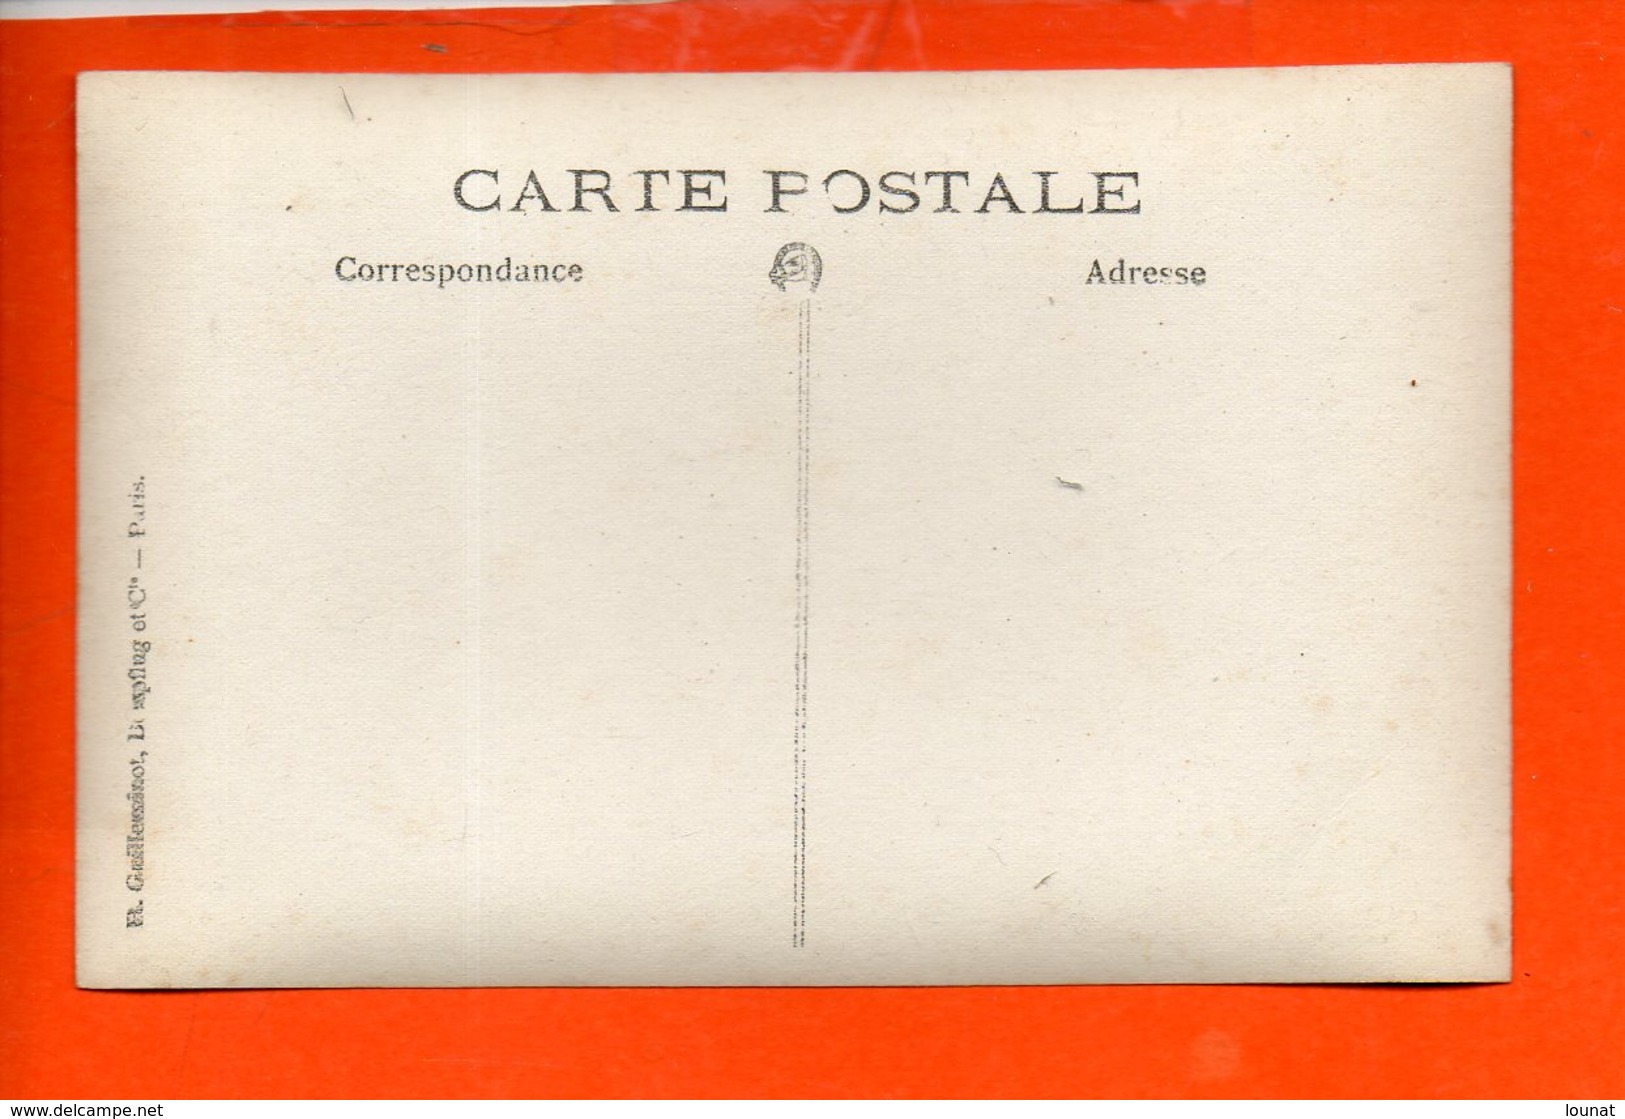 Agriculuture - Foins - Carte R. Guilleminot & B. Boespfing & Cie - Cultivation